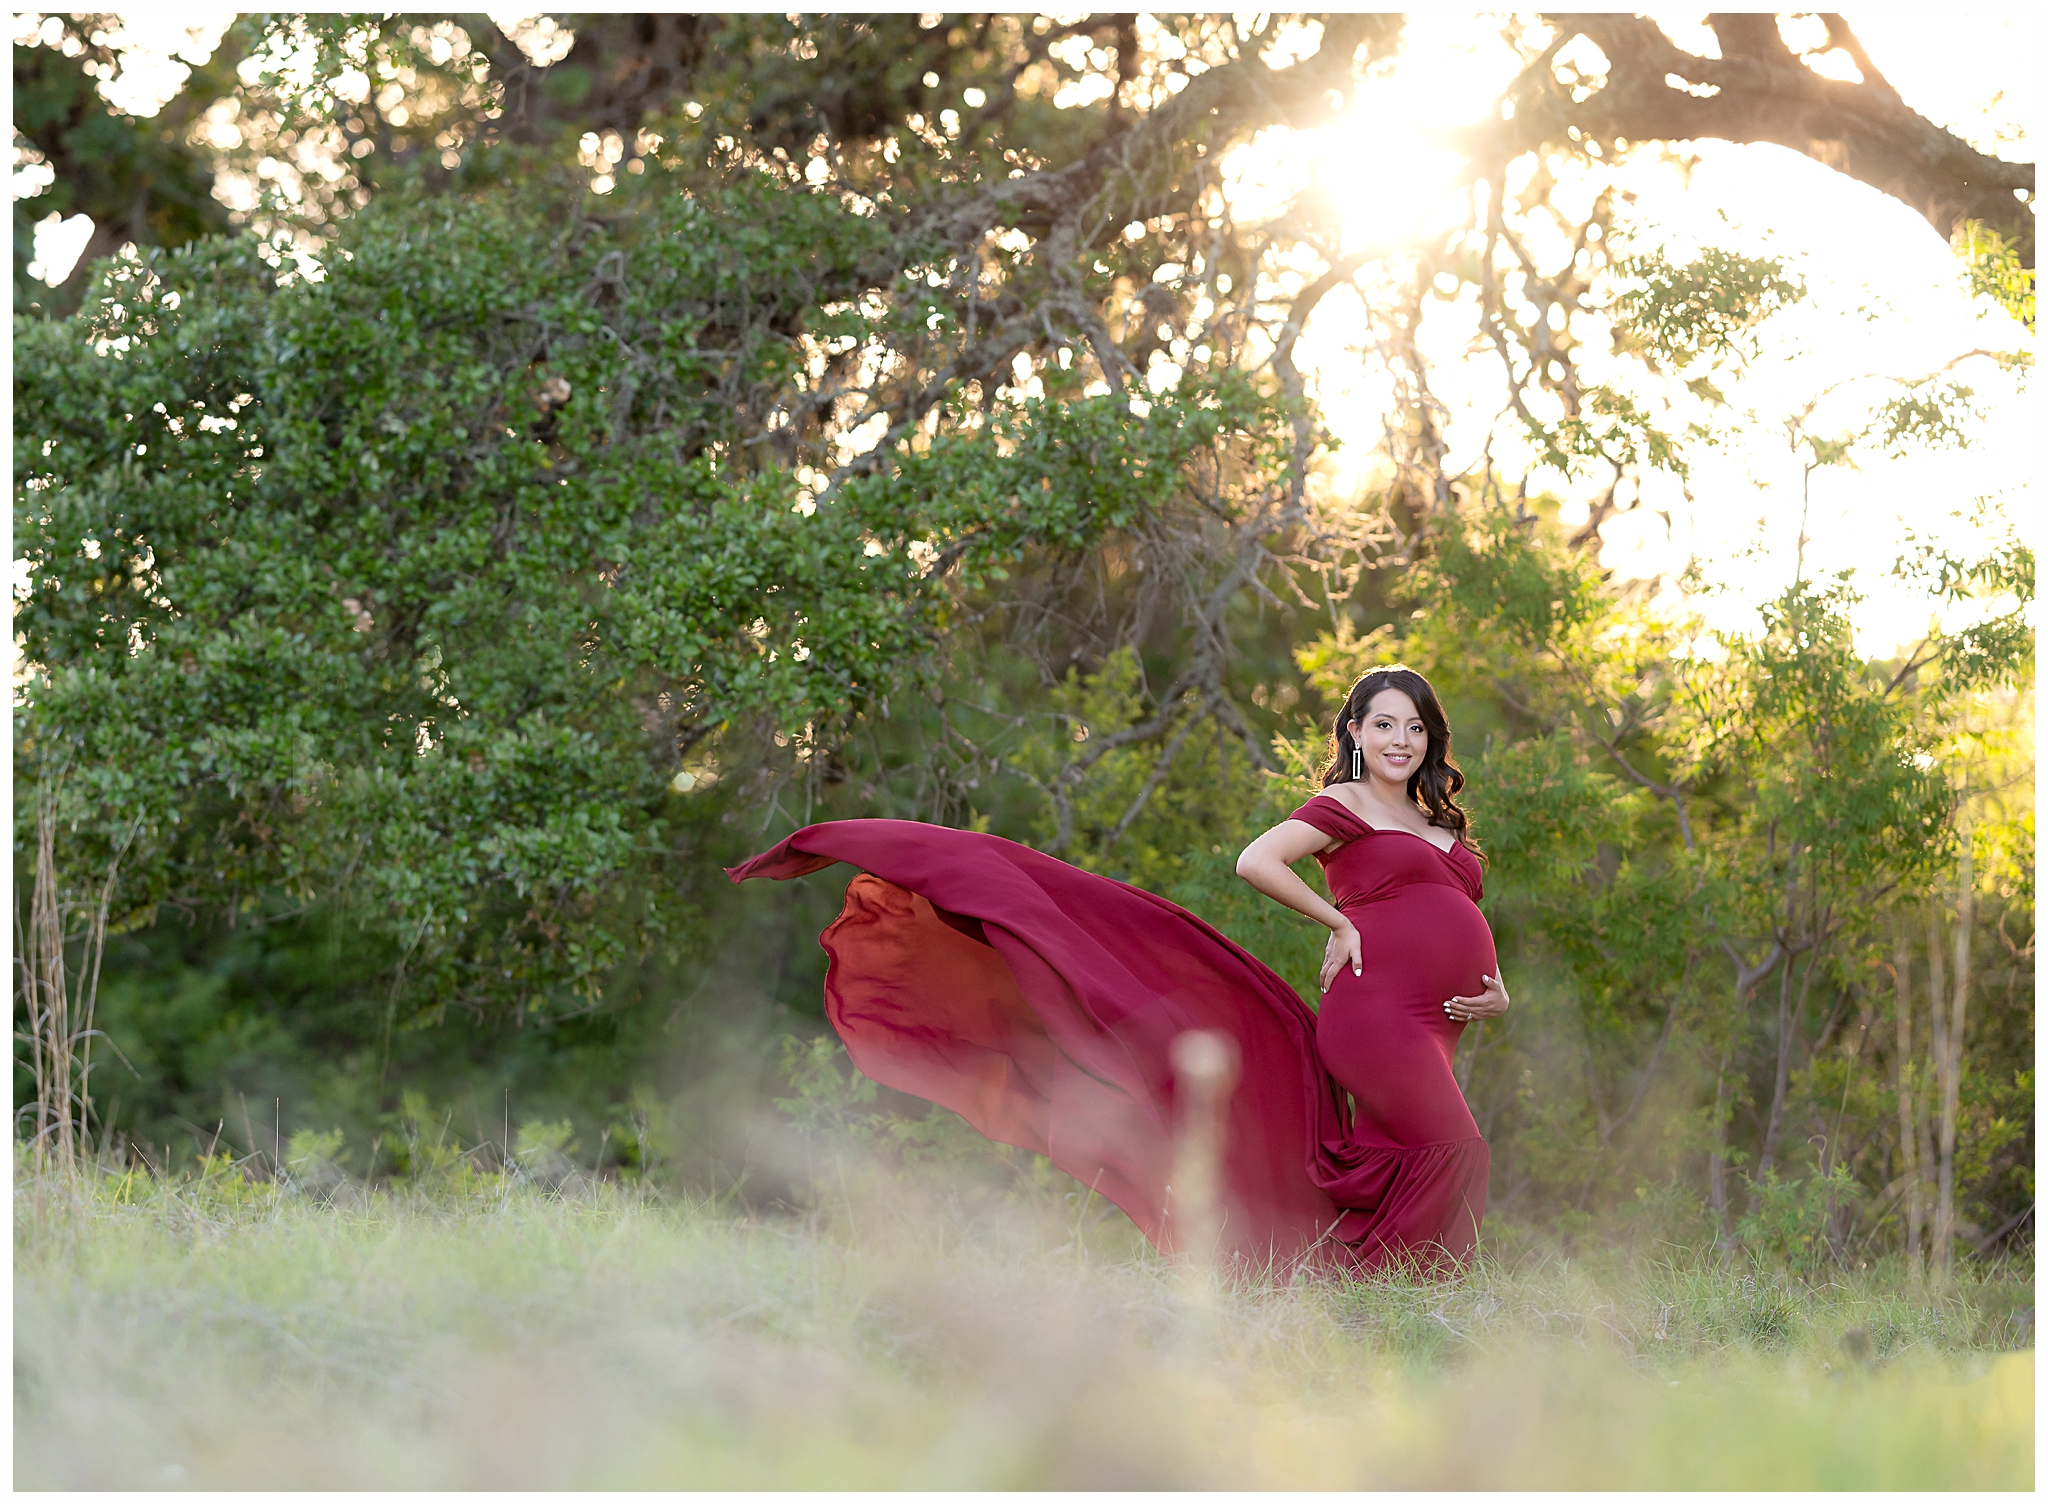 Pregnant woman in flowing maternity gown in front of scrub brush and a sunset